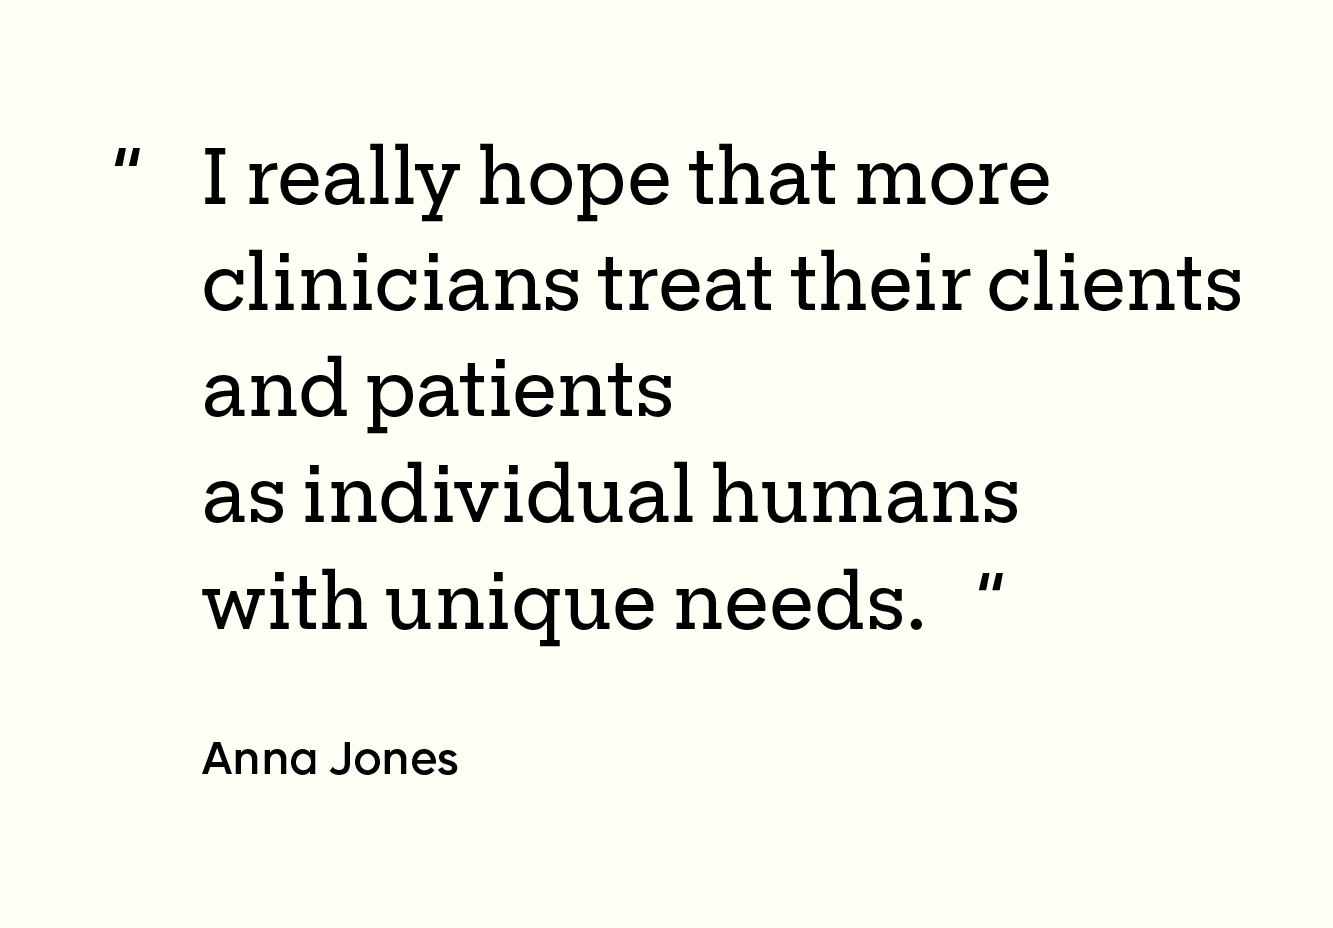 Quote from Anna Jones: “I really hope that more clinicians treat their clients and patients as individual humans with unique needs.”